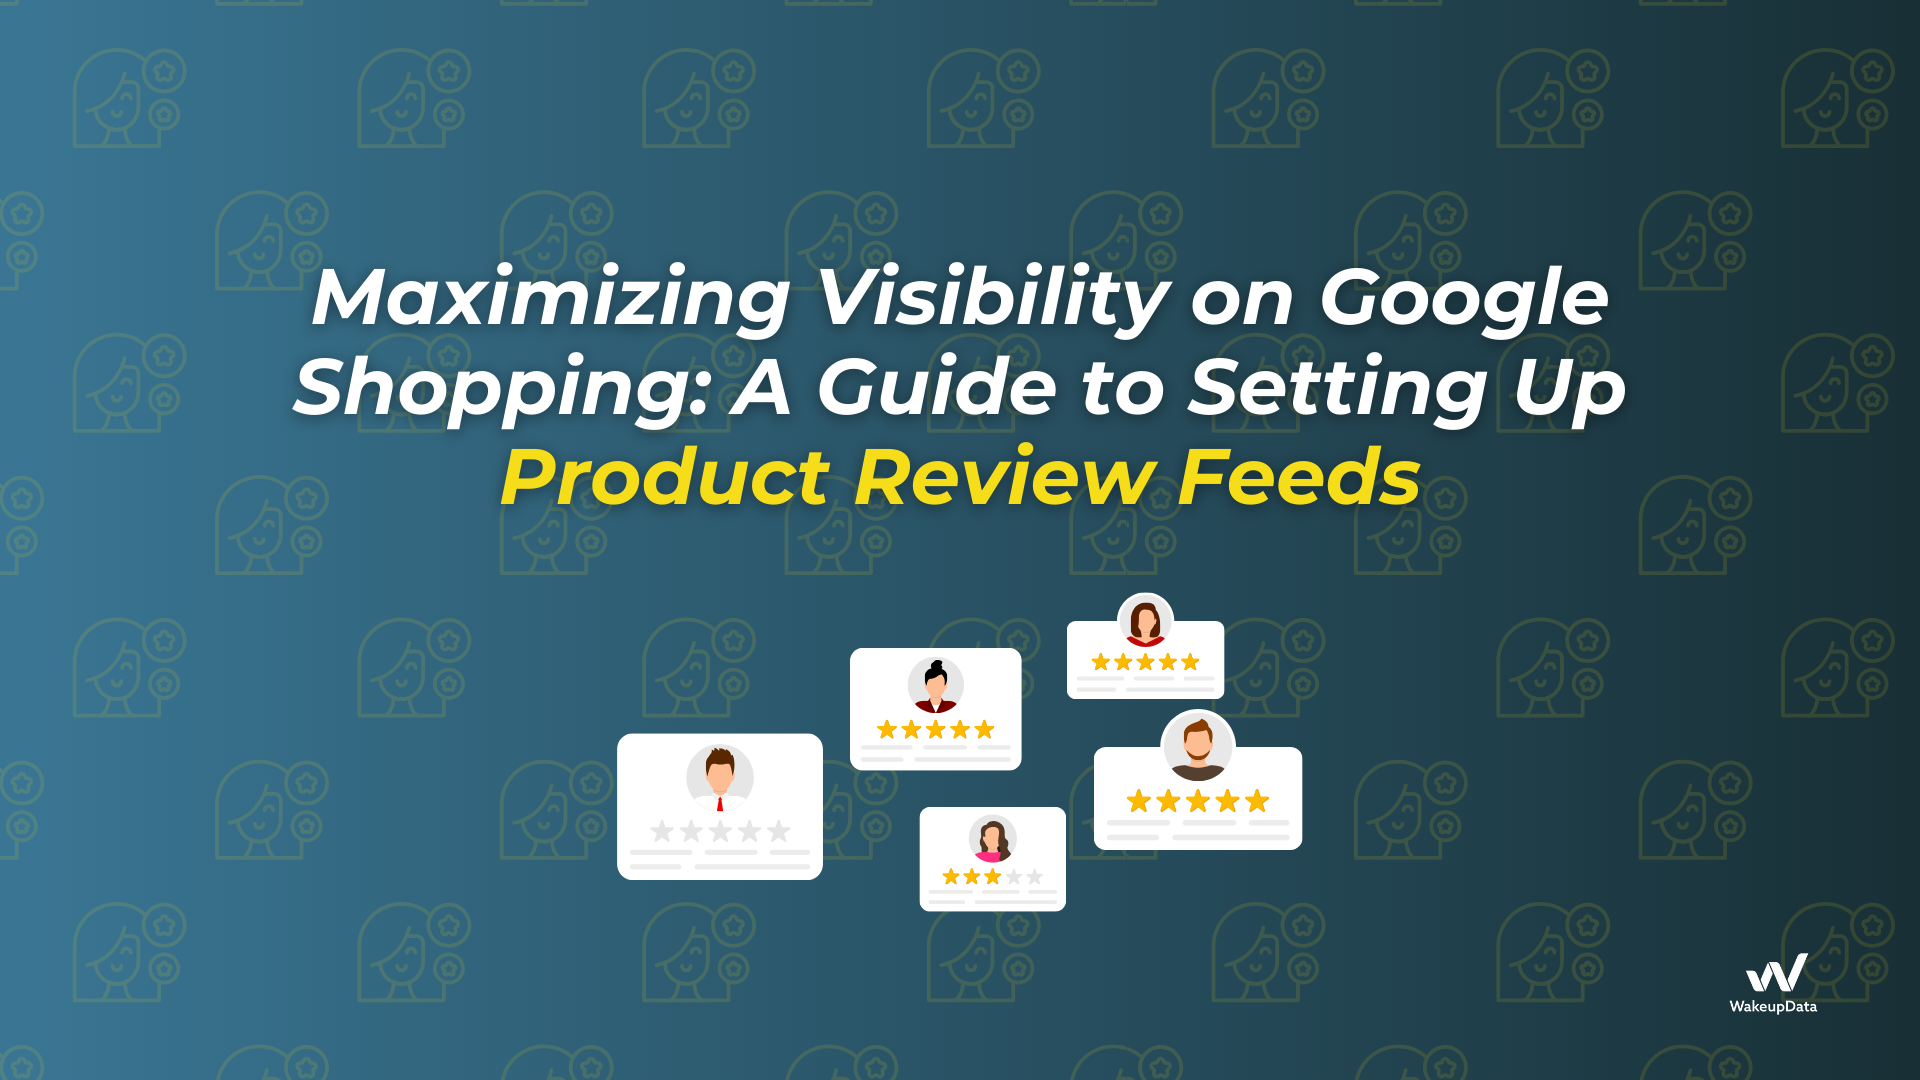 A Guide to Setting Up Product Review Feeds